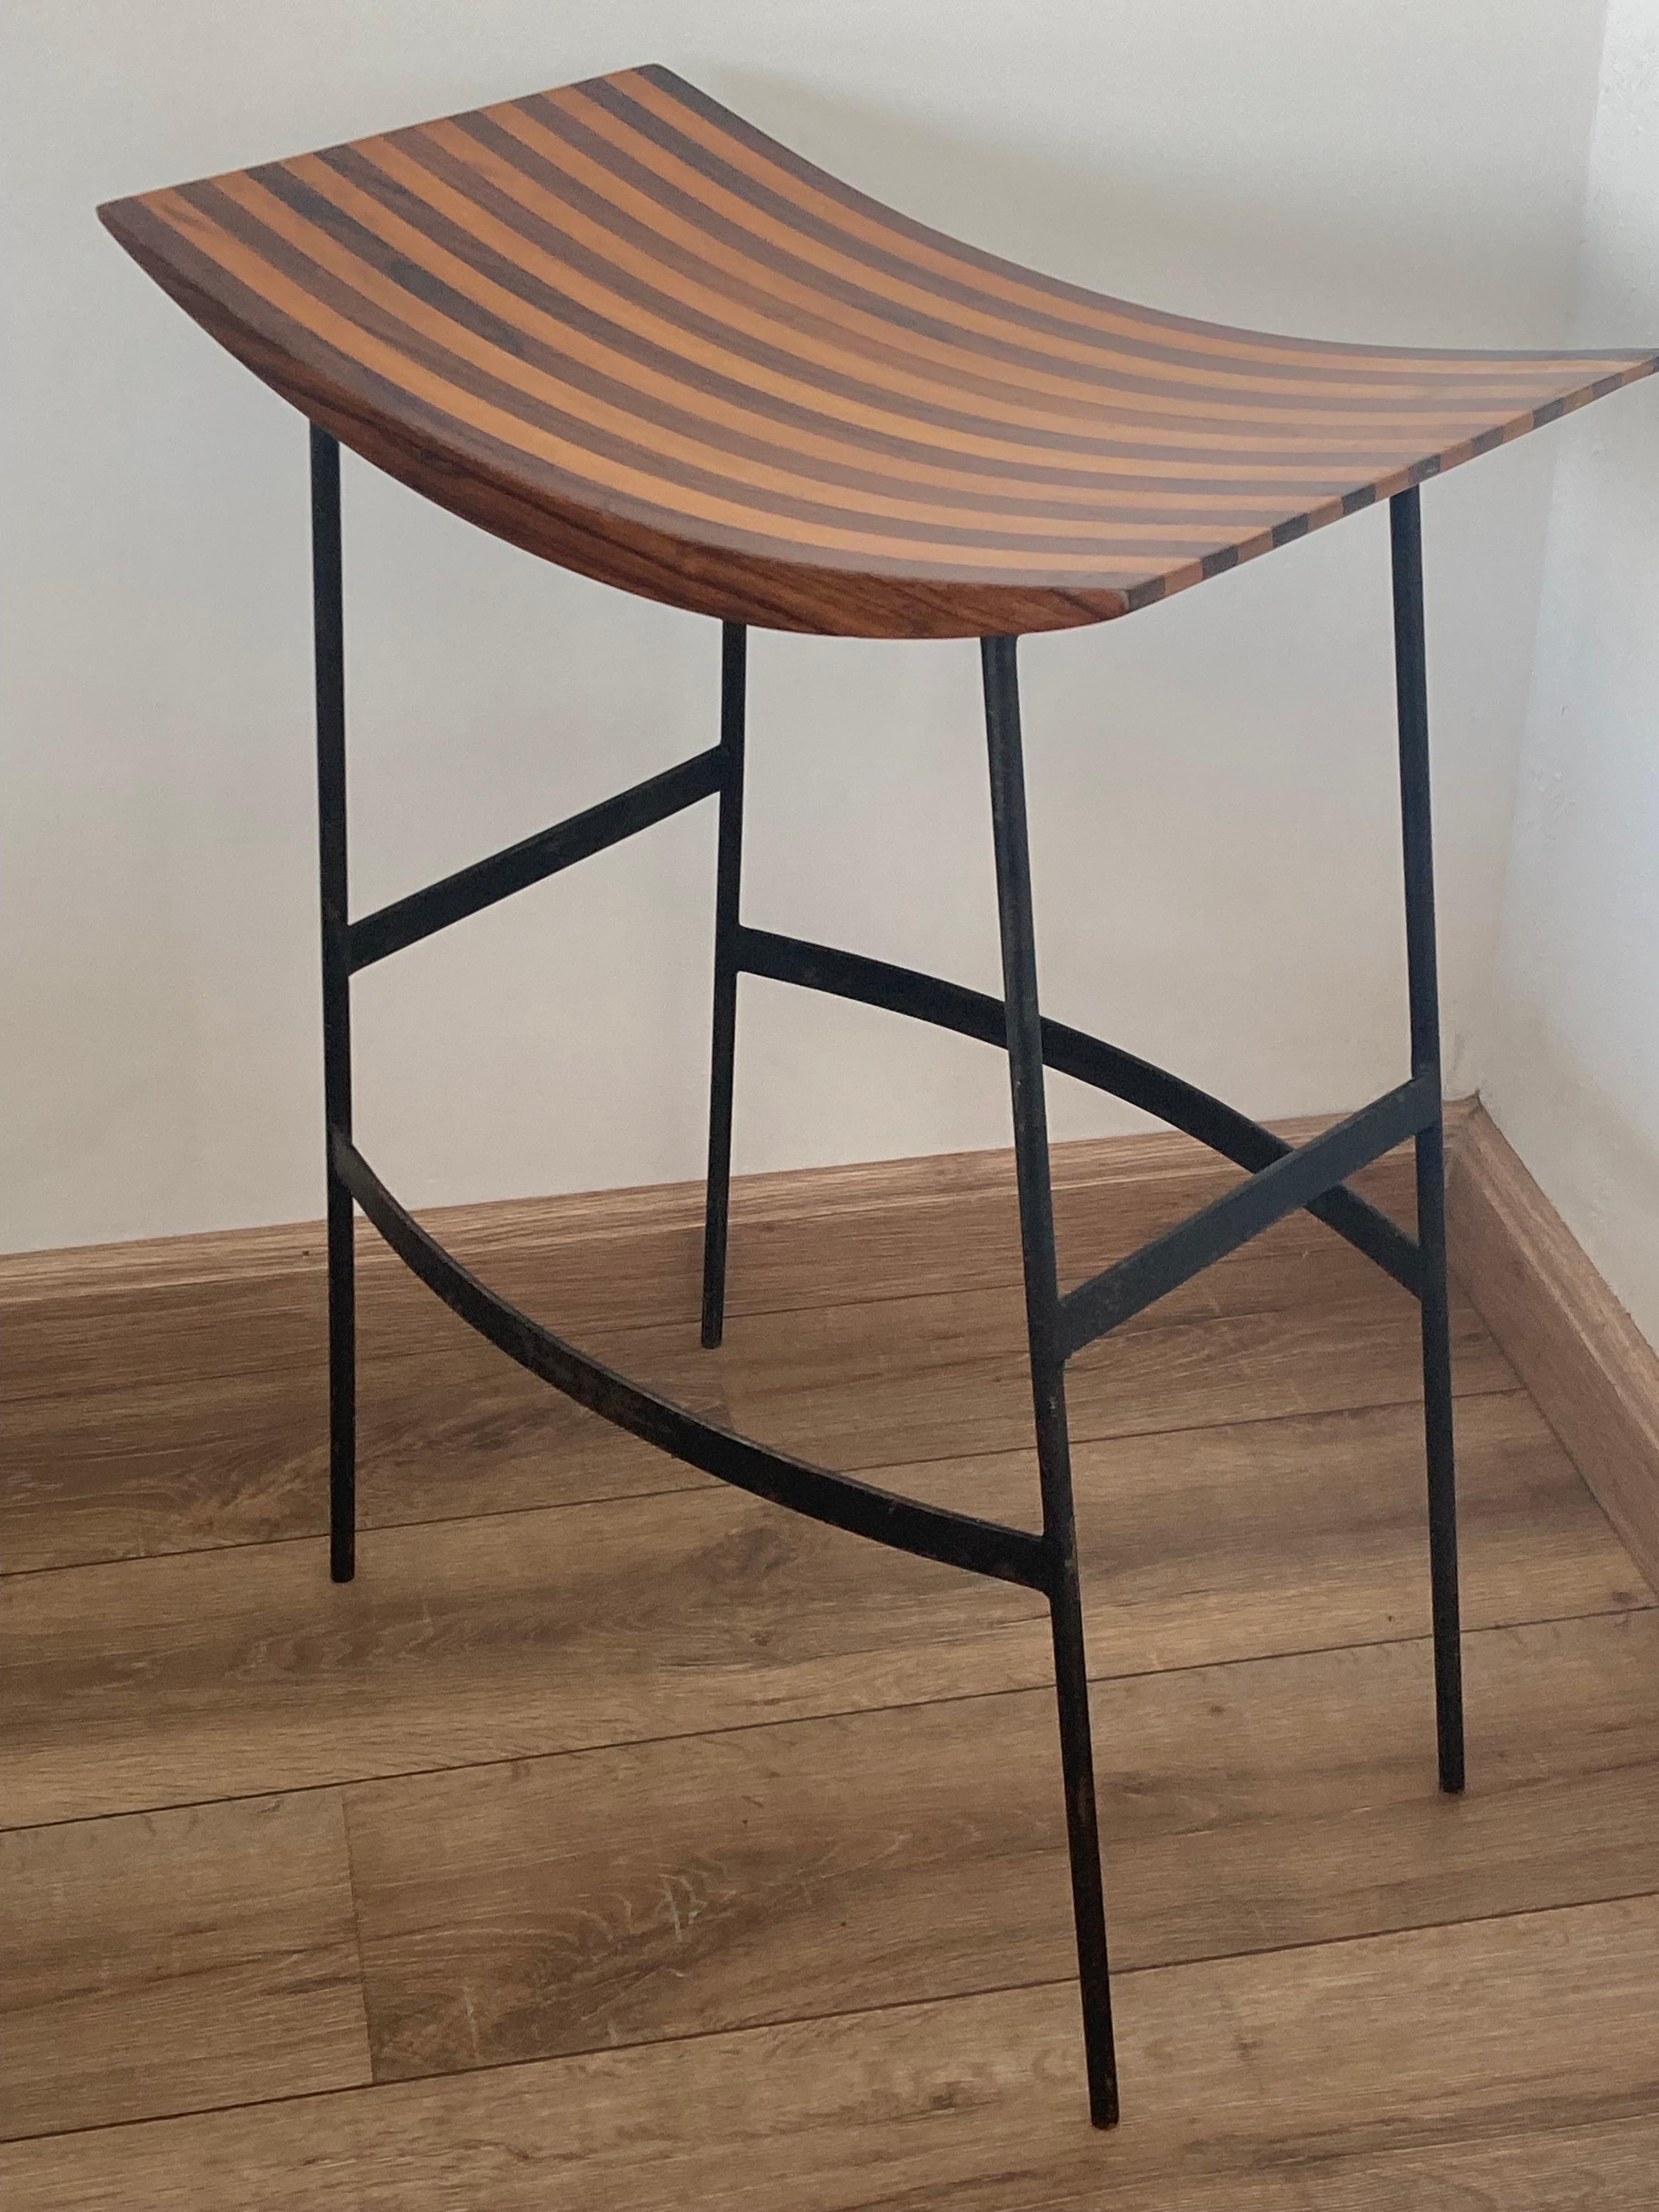 1950s Brazilian Stool by Joaquim Tenreiro In Good Condition For Sale In London, GB